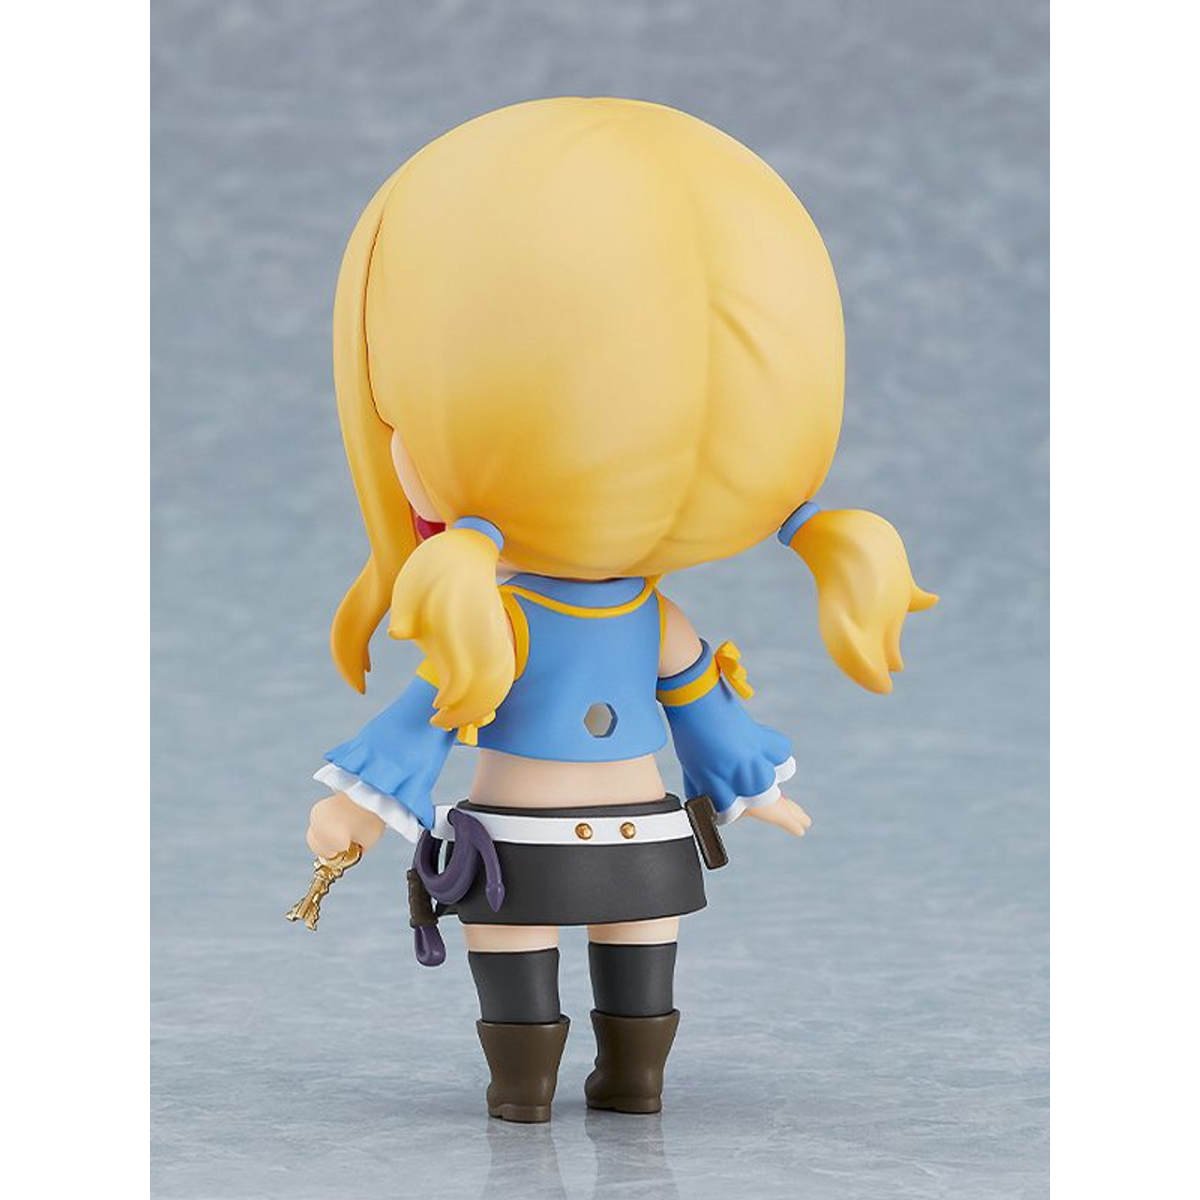 Fairy Tail Final Season Nendoroid [1924] &quot;Lucy Heartfilia&quot;-Max Factory-Ace Cards &amp; Collectibles